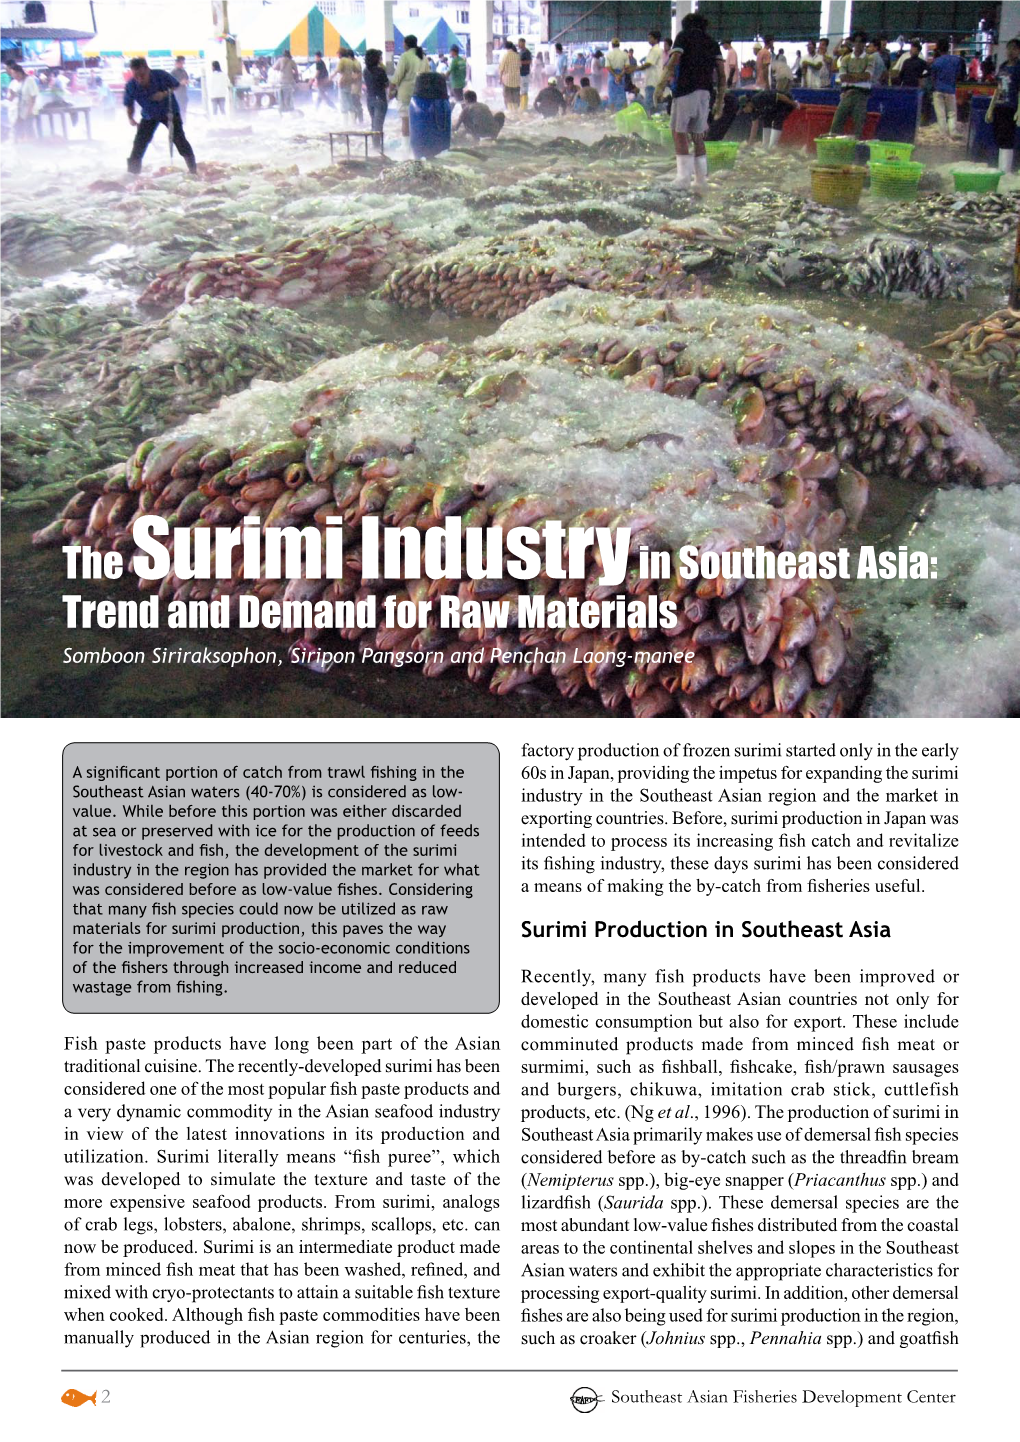 The Surimi Industryin Southeast Asia: Trend and Demand for Raw Materials